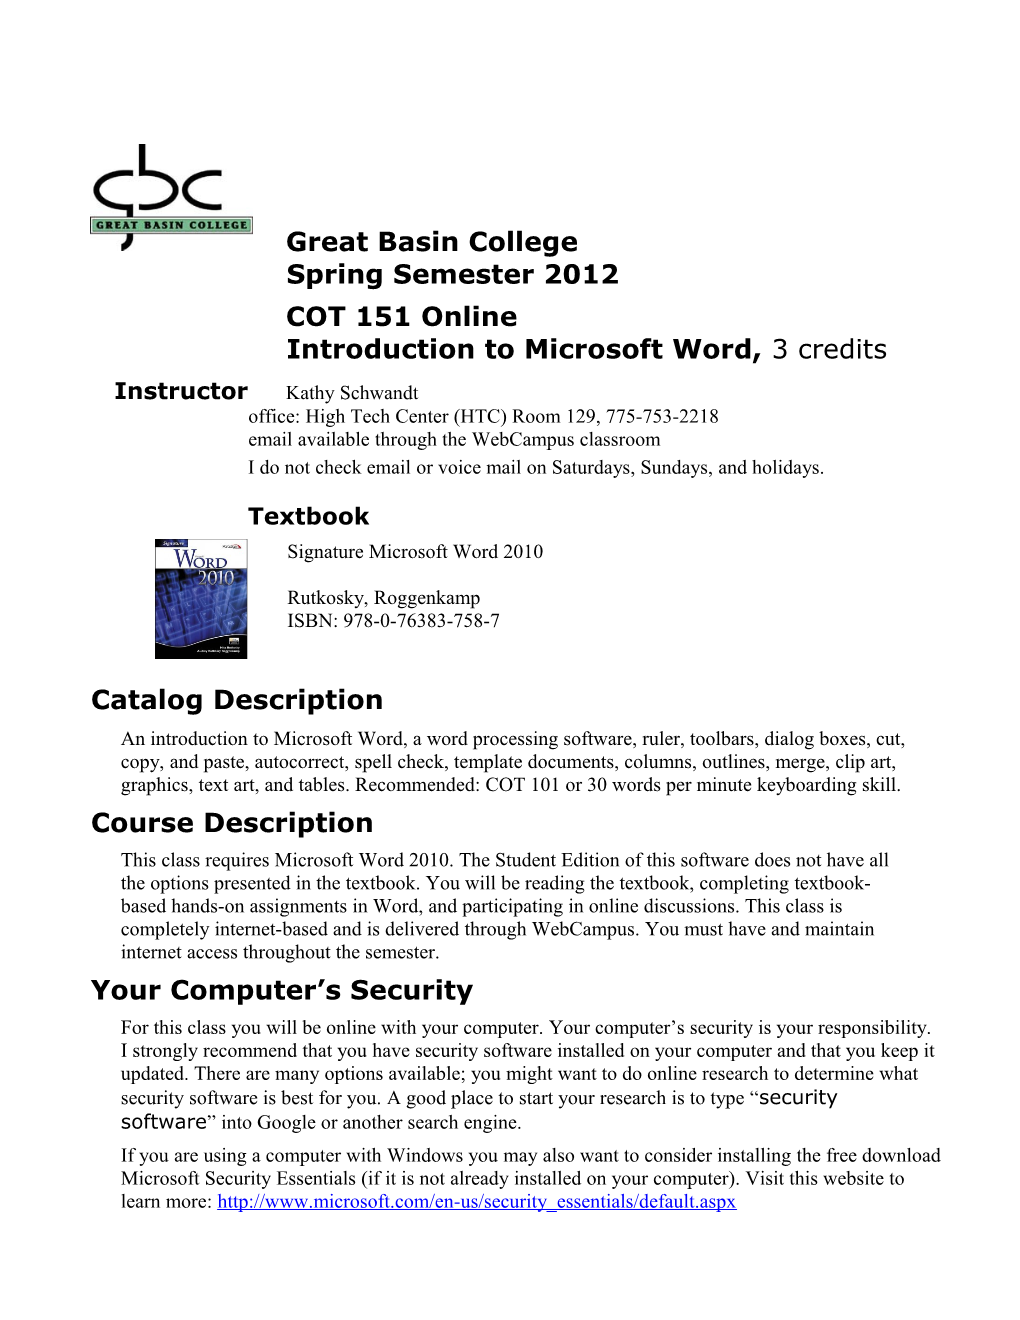 Introduction to Microsoft Word, 3 Credits